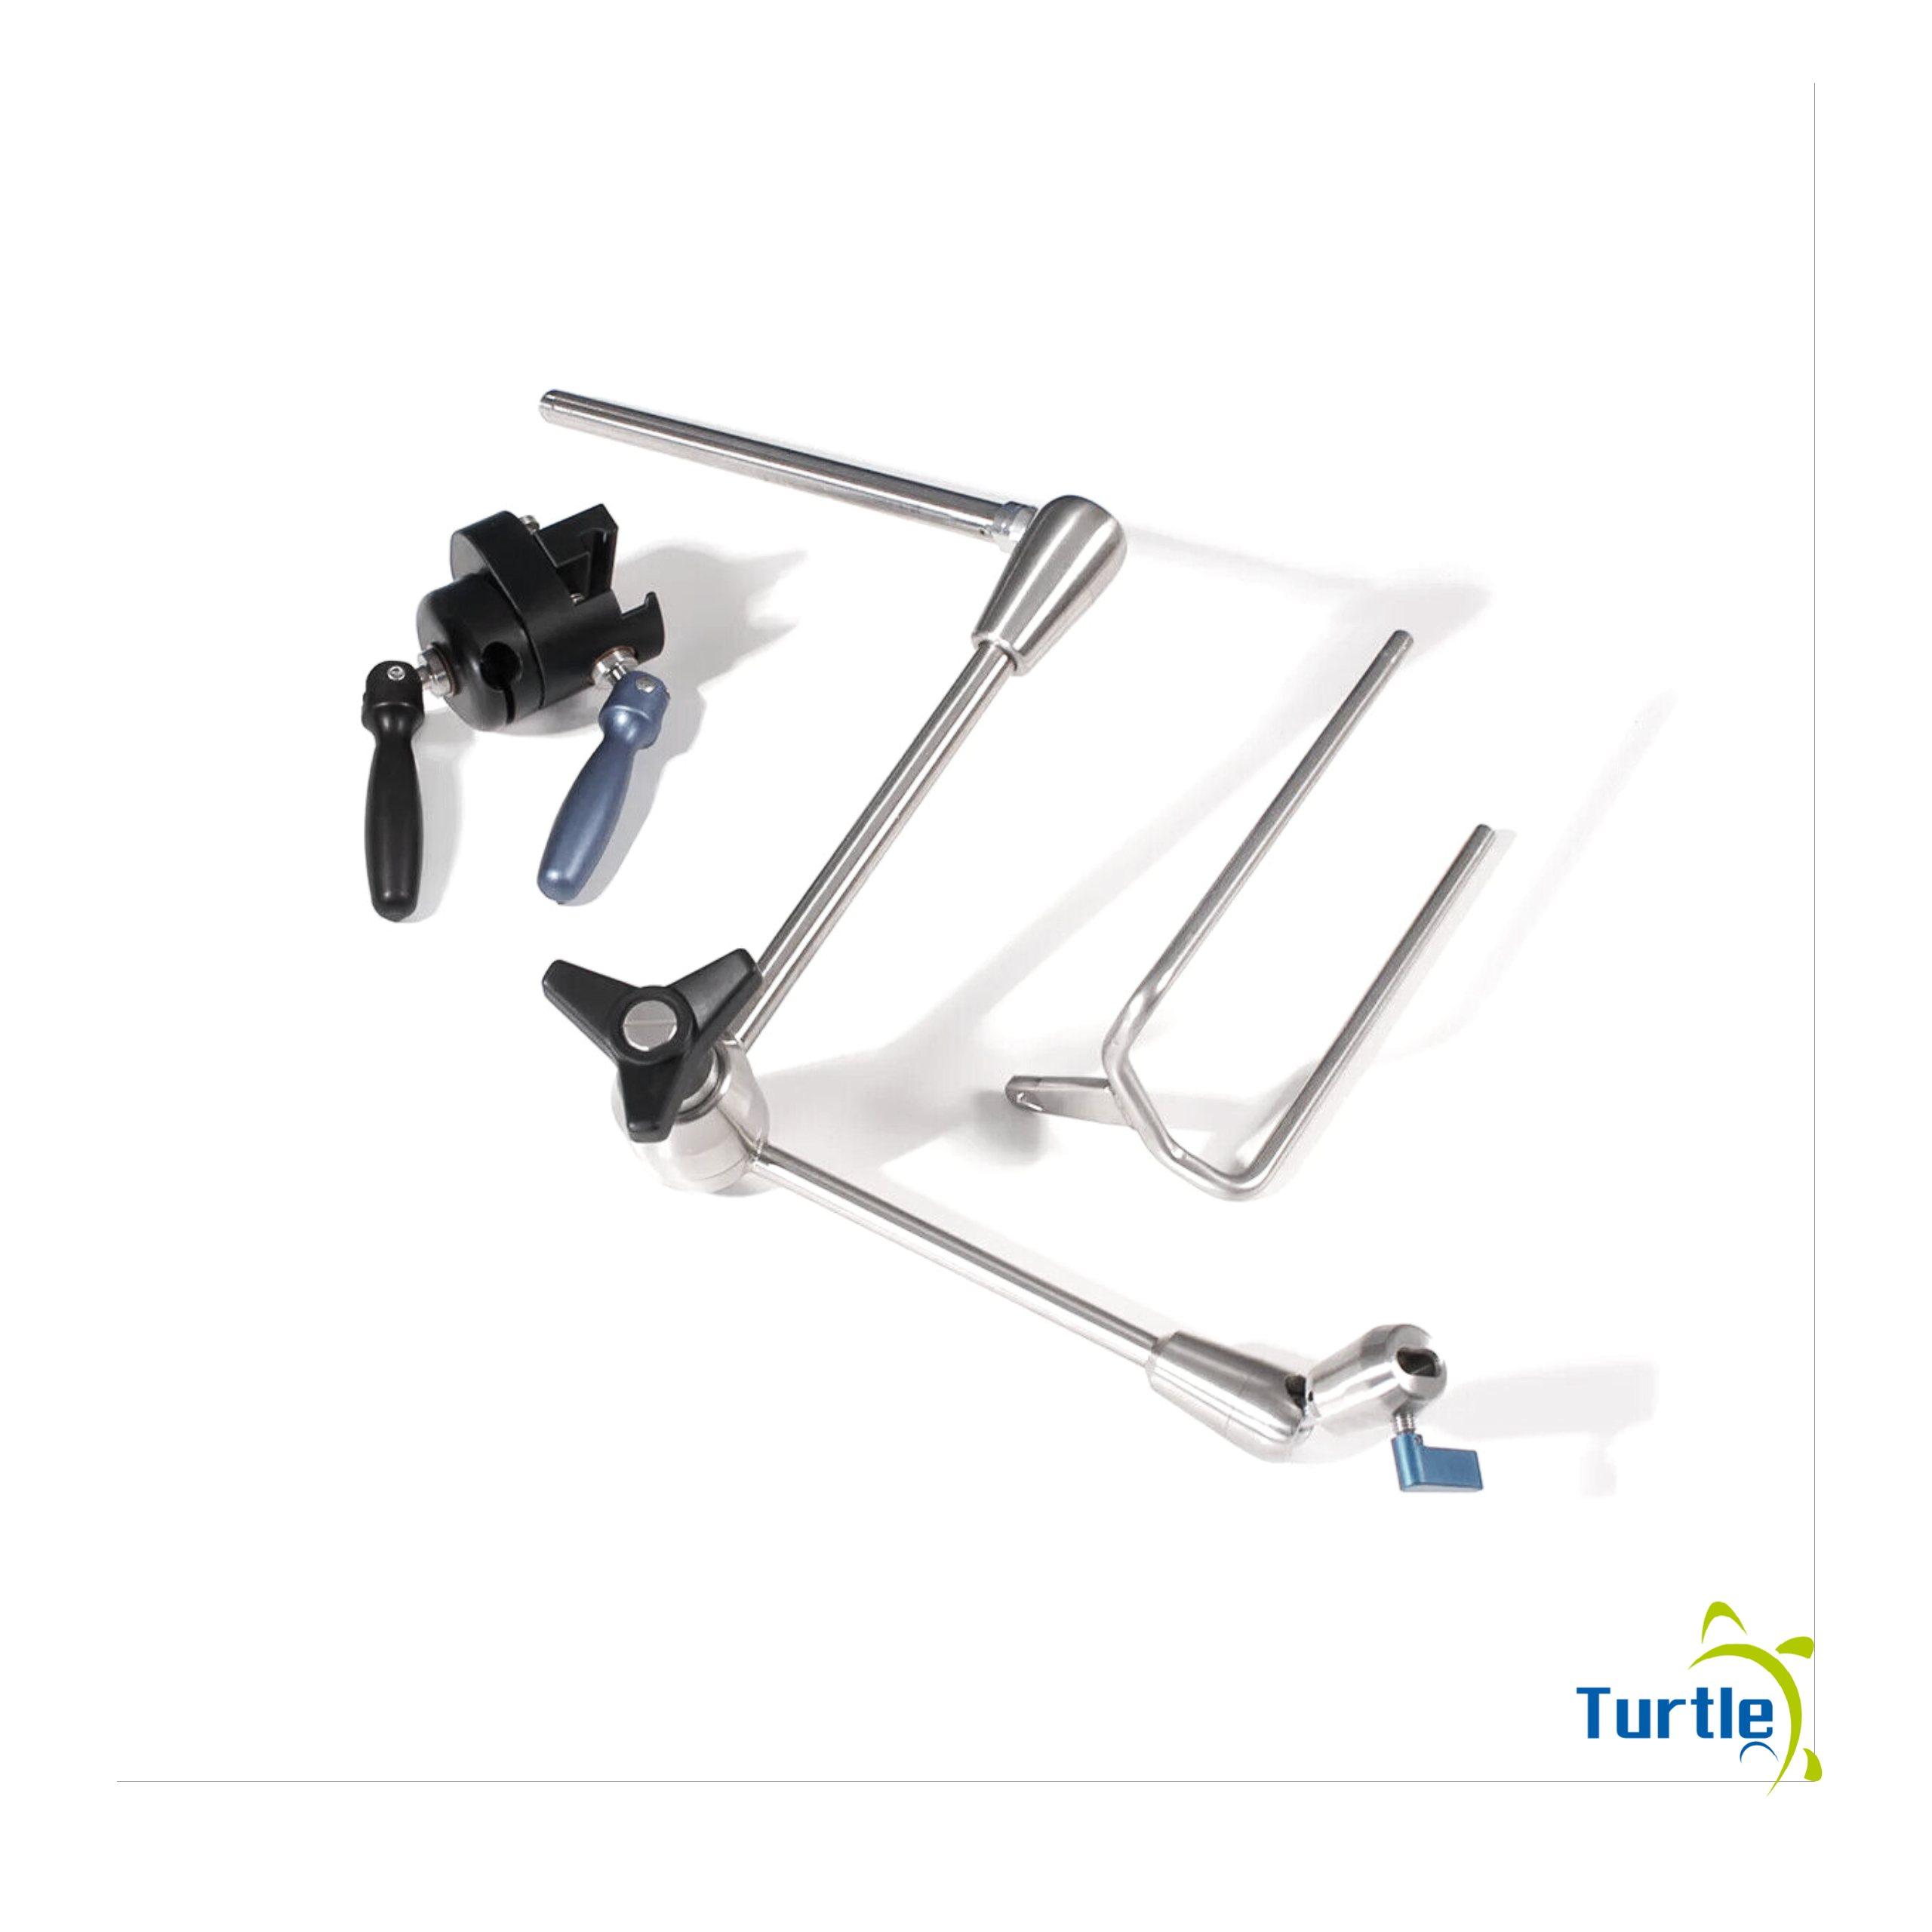 Allen A-92000 Arm Positioner Set Includes A-92002 A-92003 Clamp and Arm support